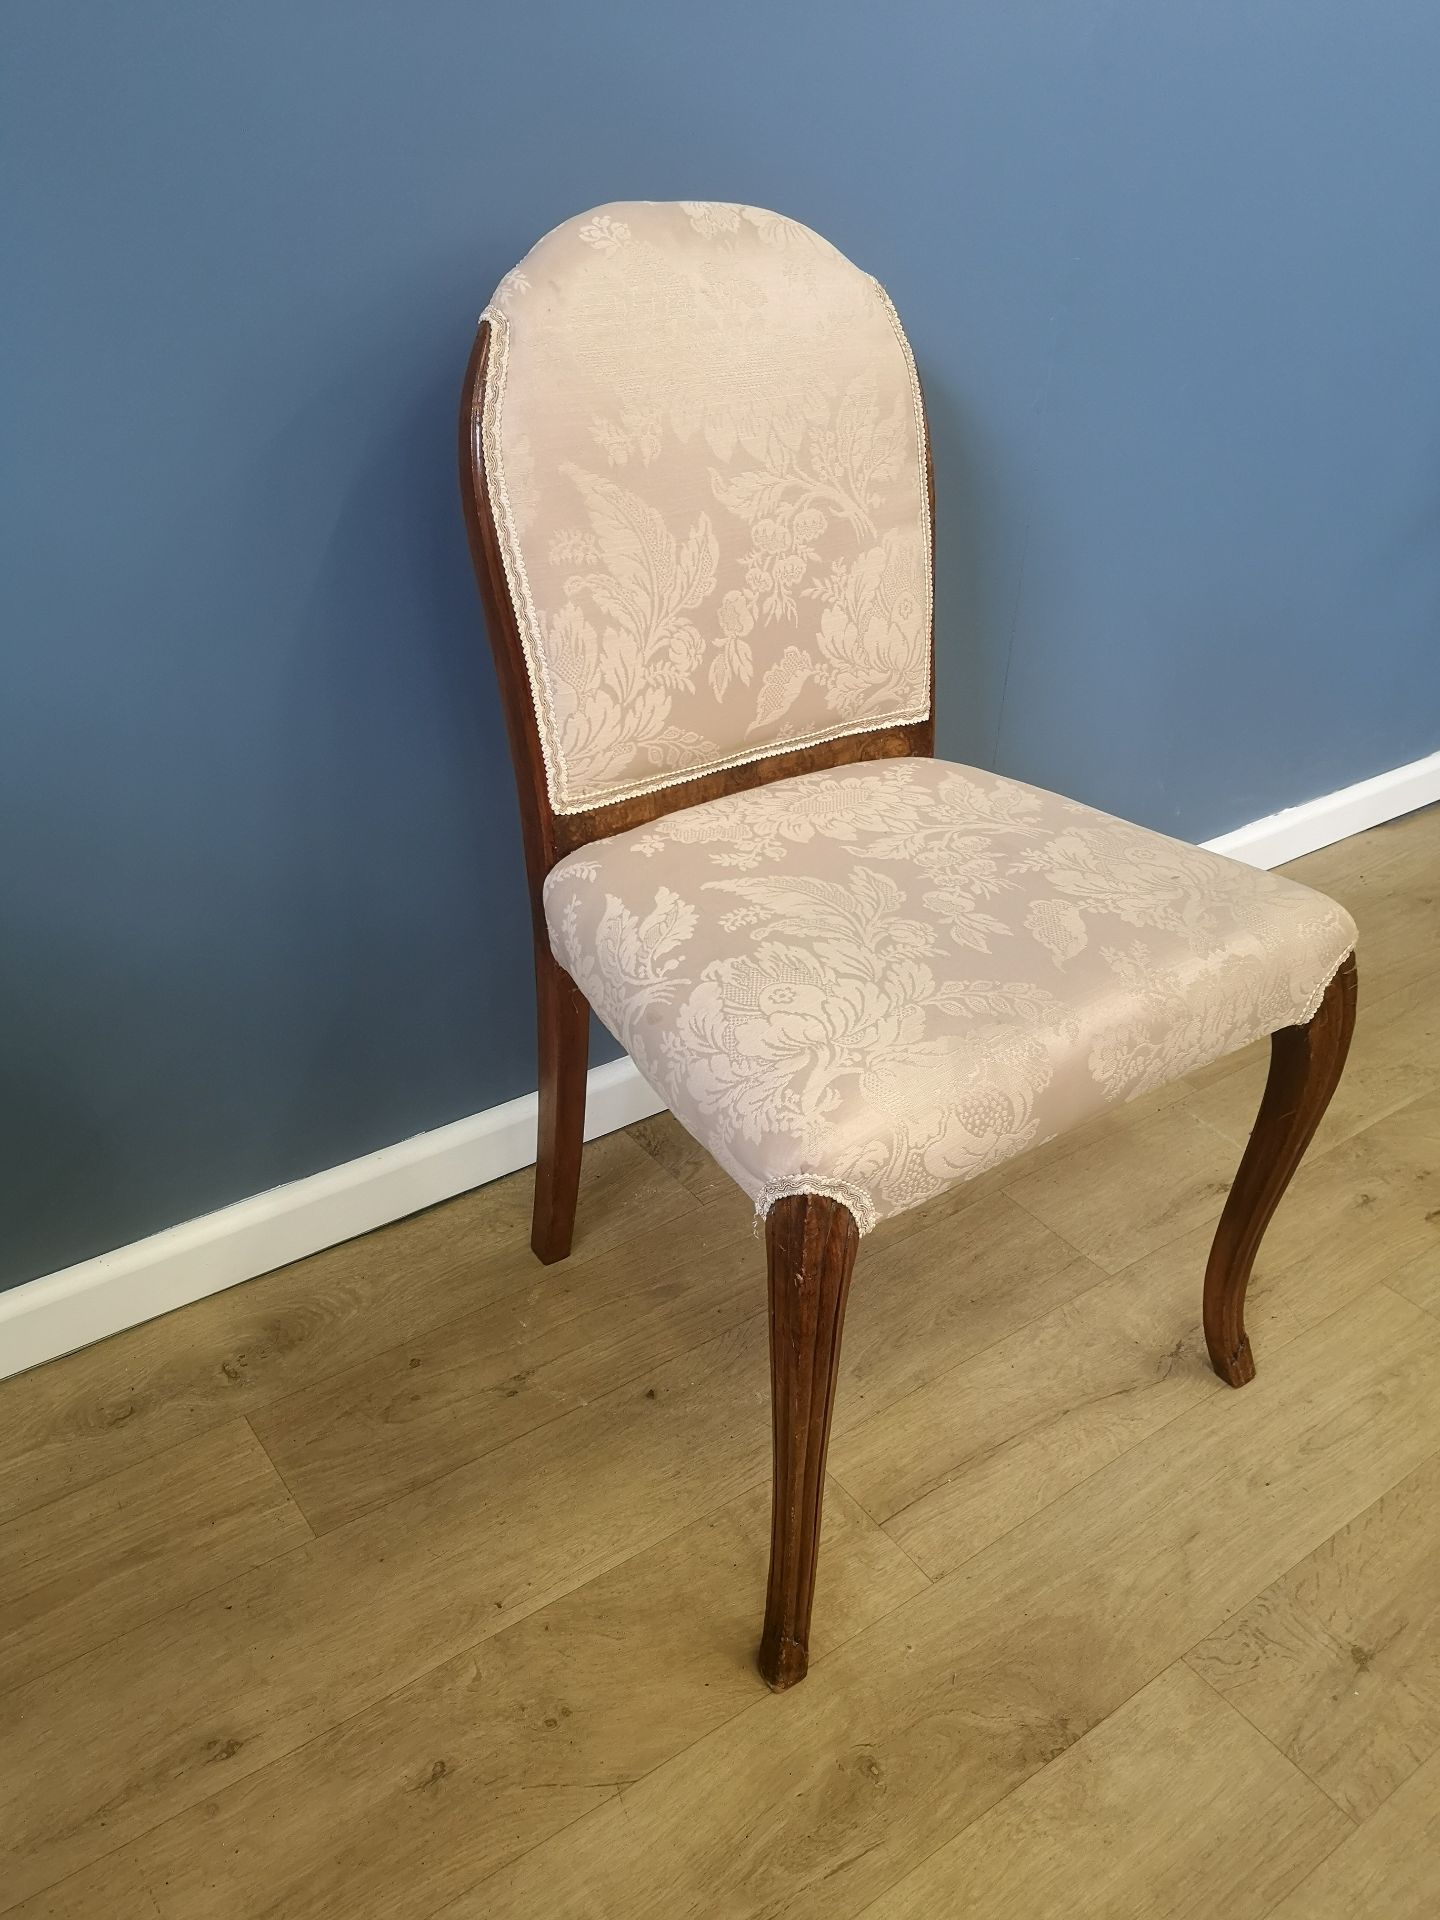 Four mahogany dining chairs - Image 2 of 4